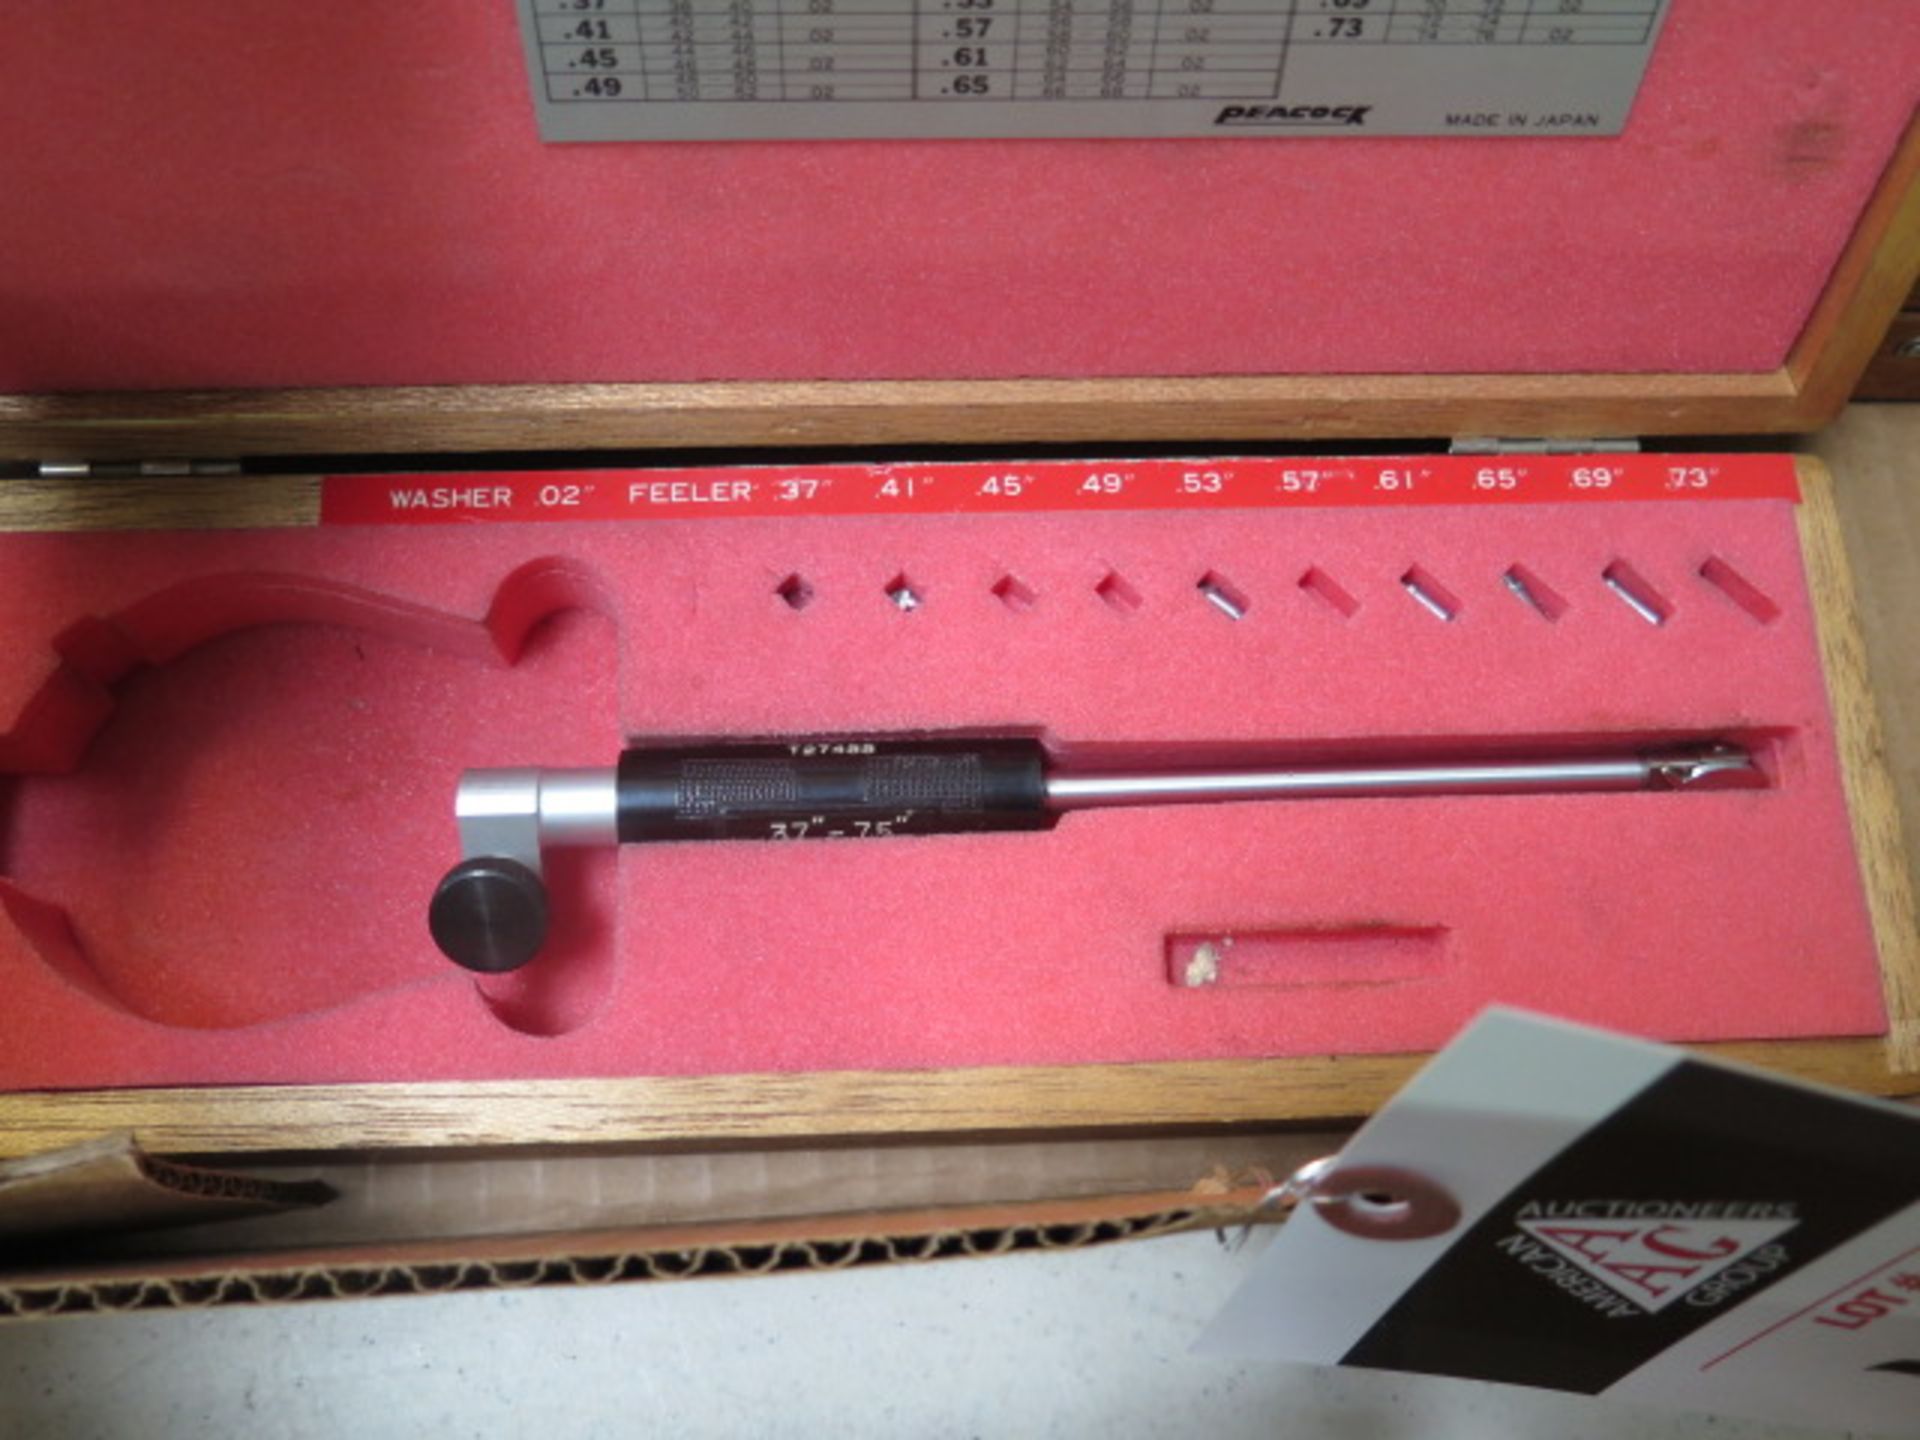 Mitutoyo 2"-4" Dial Bore Gage, Peacock 0.75"-1.5" and 0.37"-.75" Dcial Bore Gages (SOLD AS-IS - NO W - Image 5 of 5